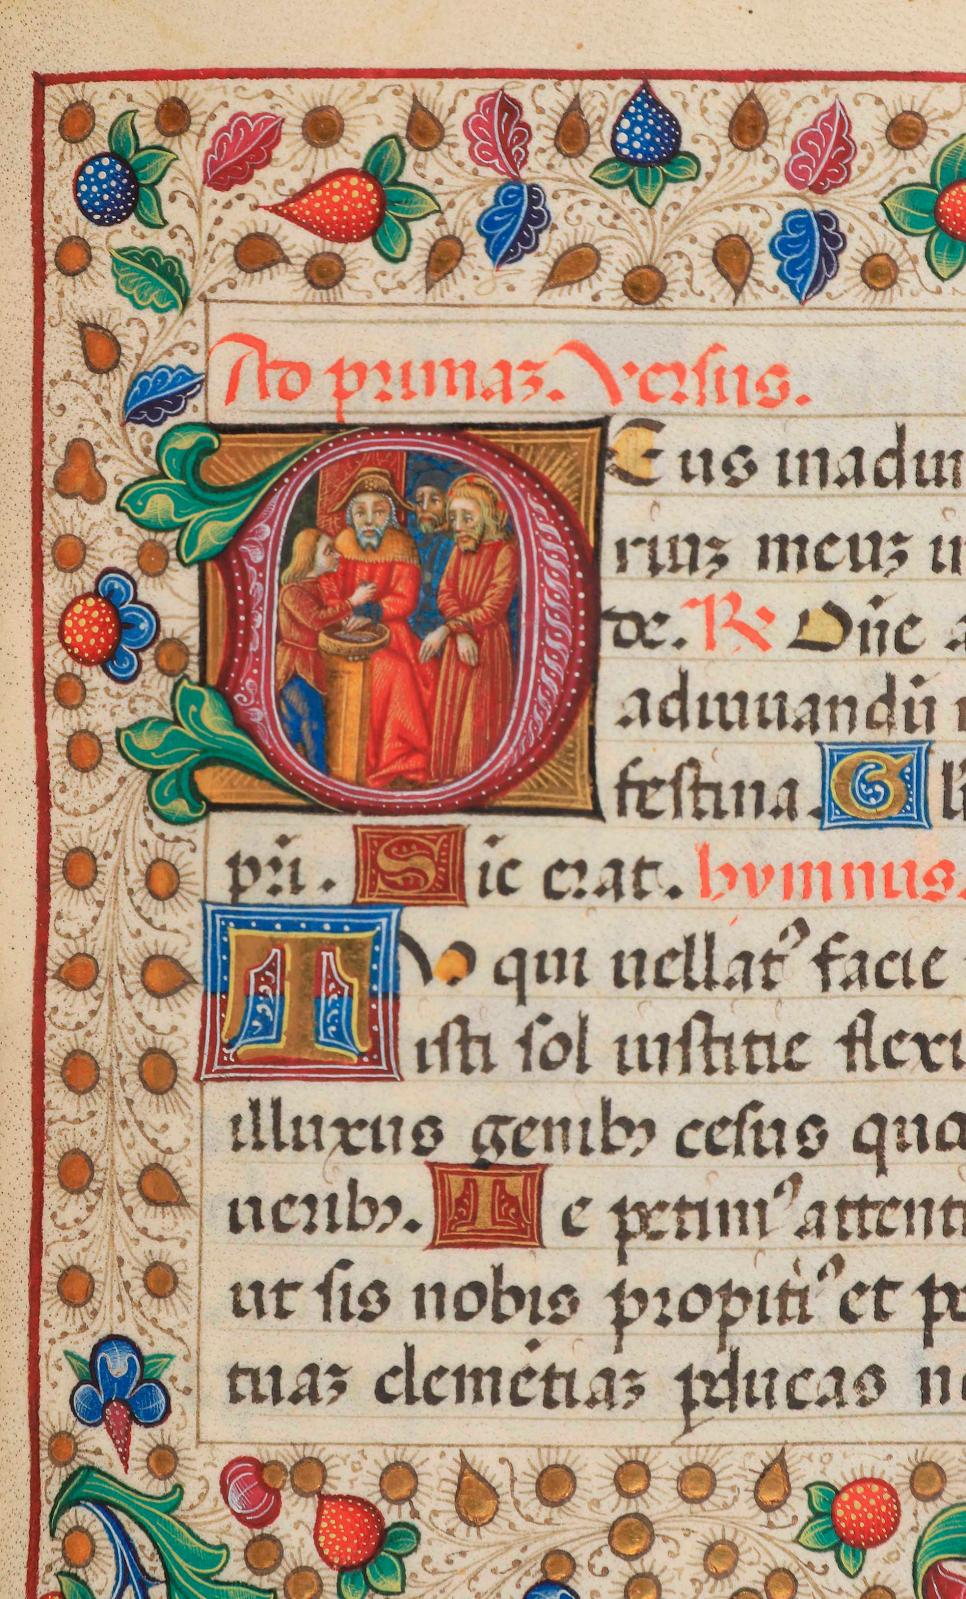 Historiated letter from folio 168r of the Book of Hours of Antoine de Savoie-Raconis and Jeanne de Pontevès.